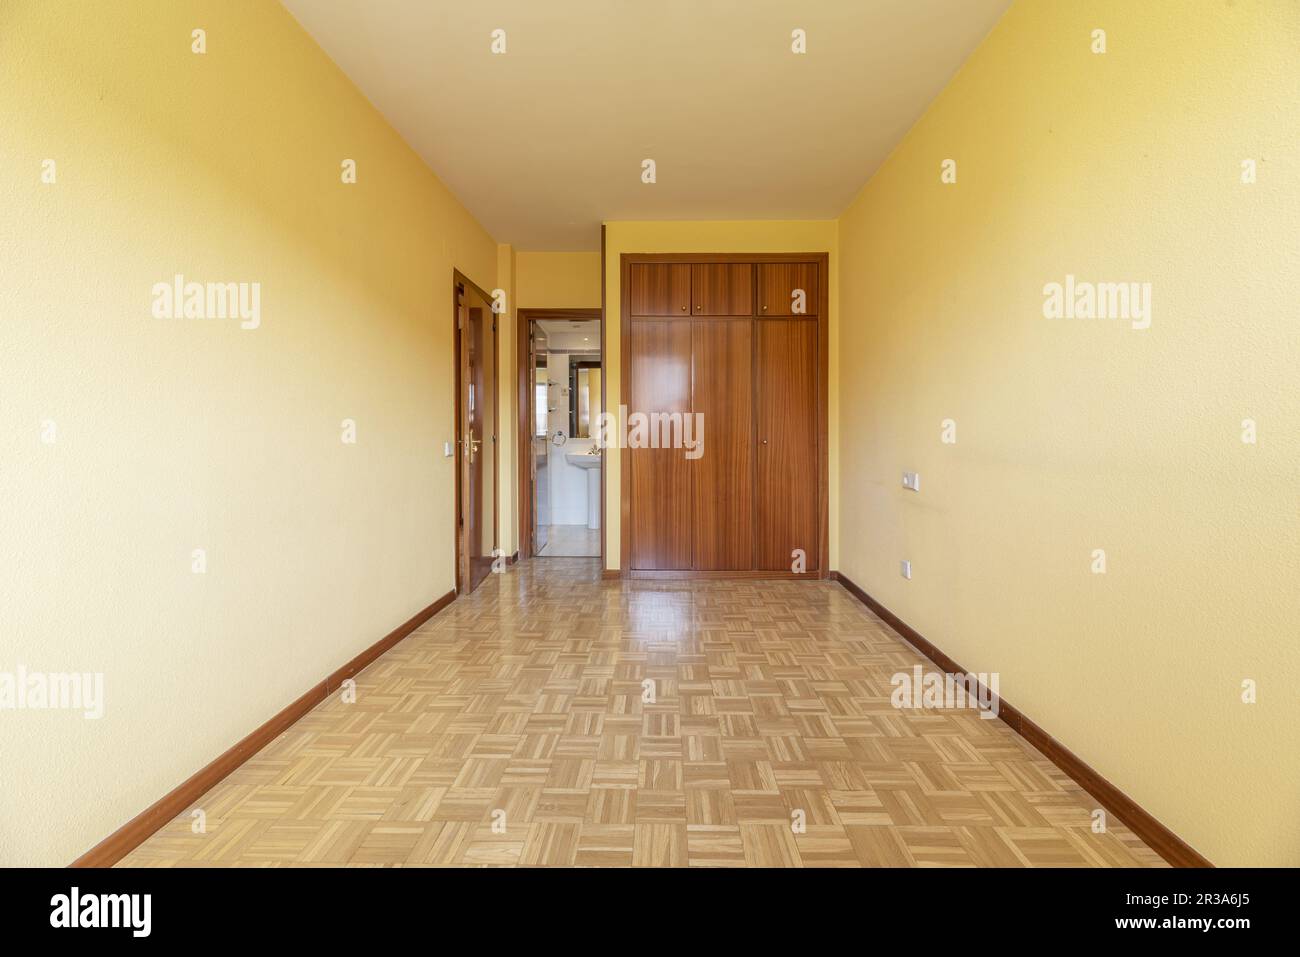 A spacious empty room with a built-in wardrobe with varnished sapele wood doors and an en-suite bathroom Stock Photo